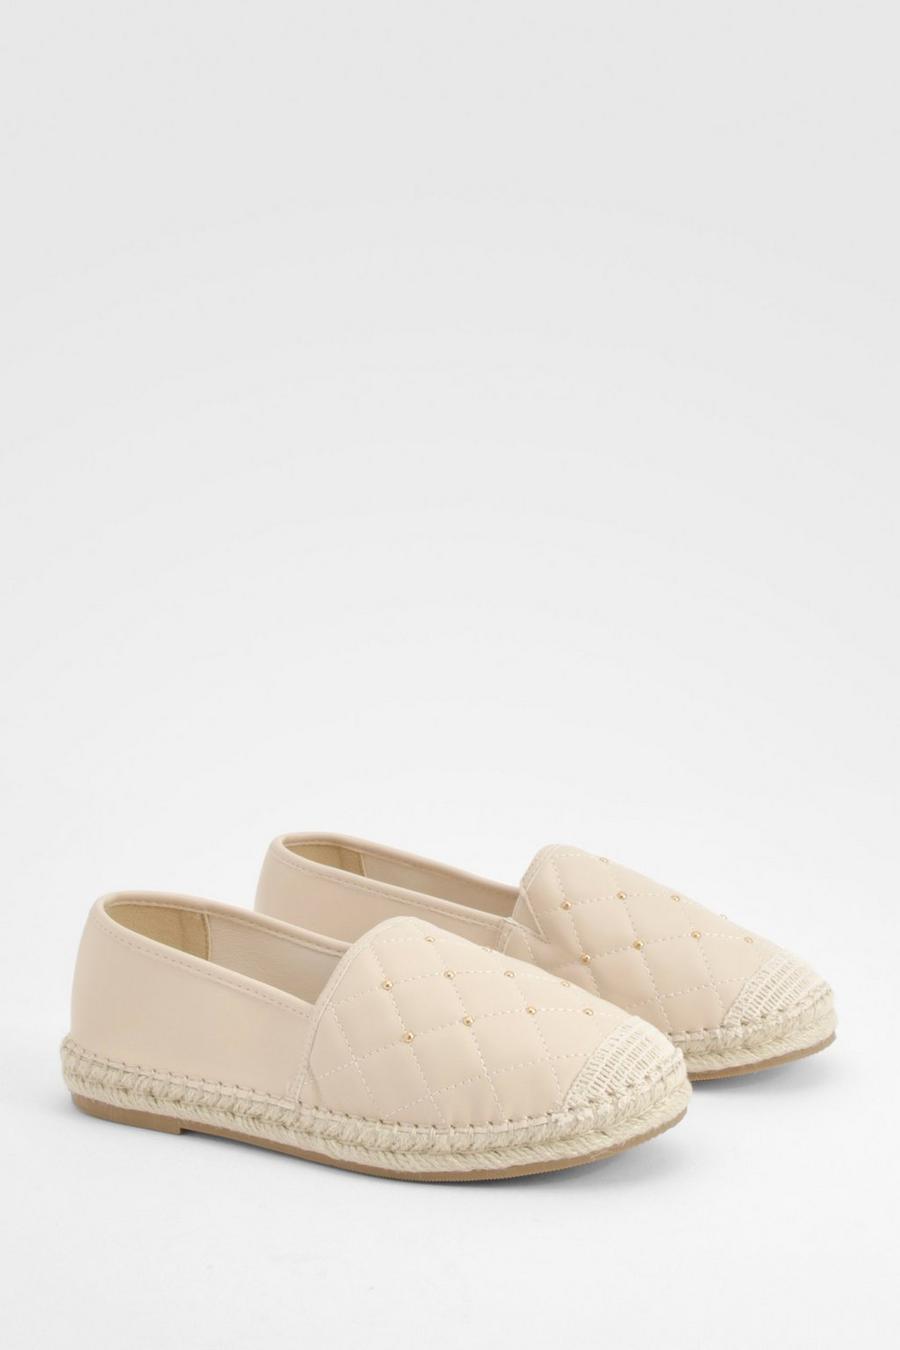 Nude Closed Toe Quilted Stud Detail Espadrilles